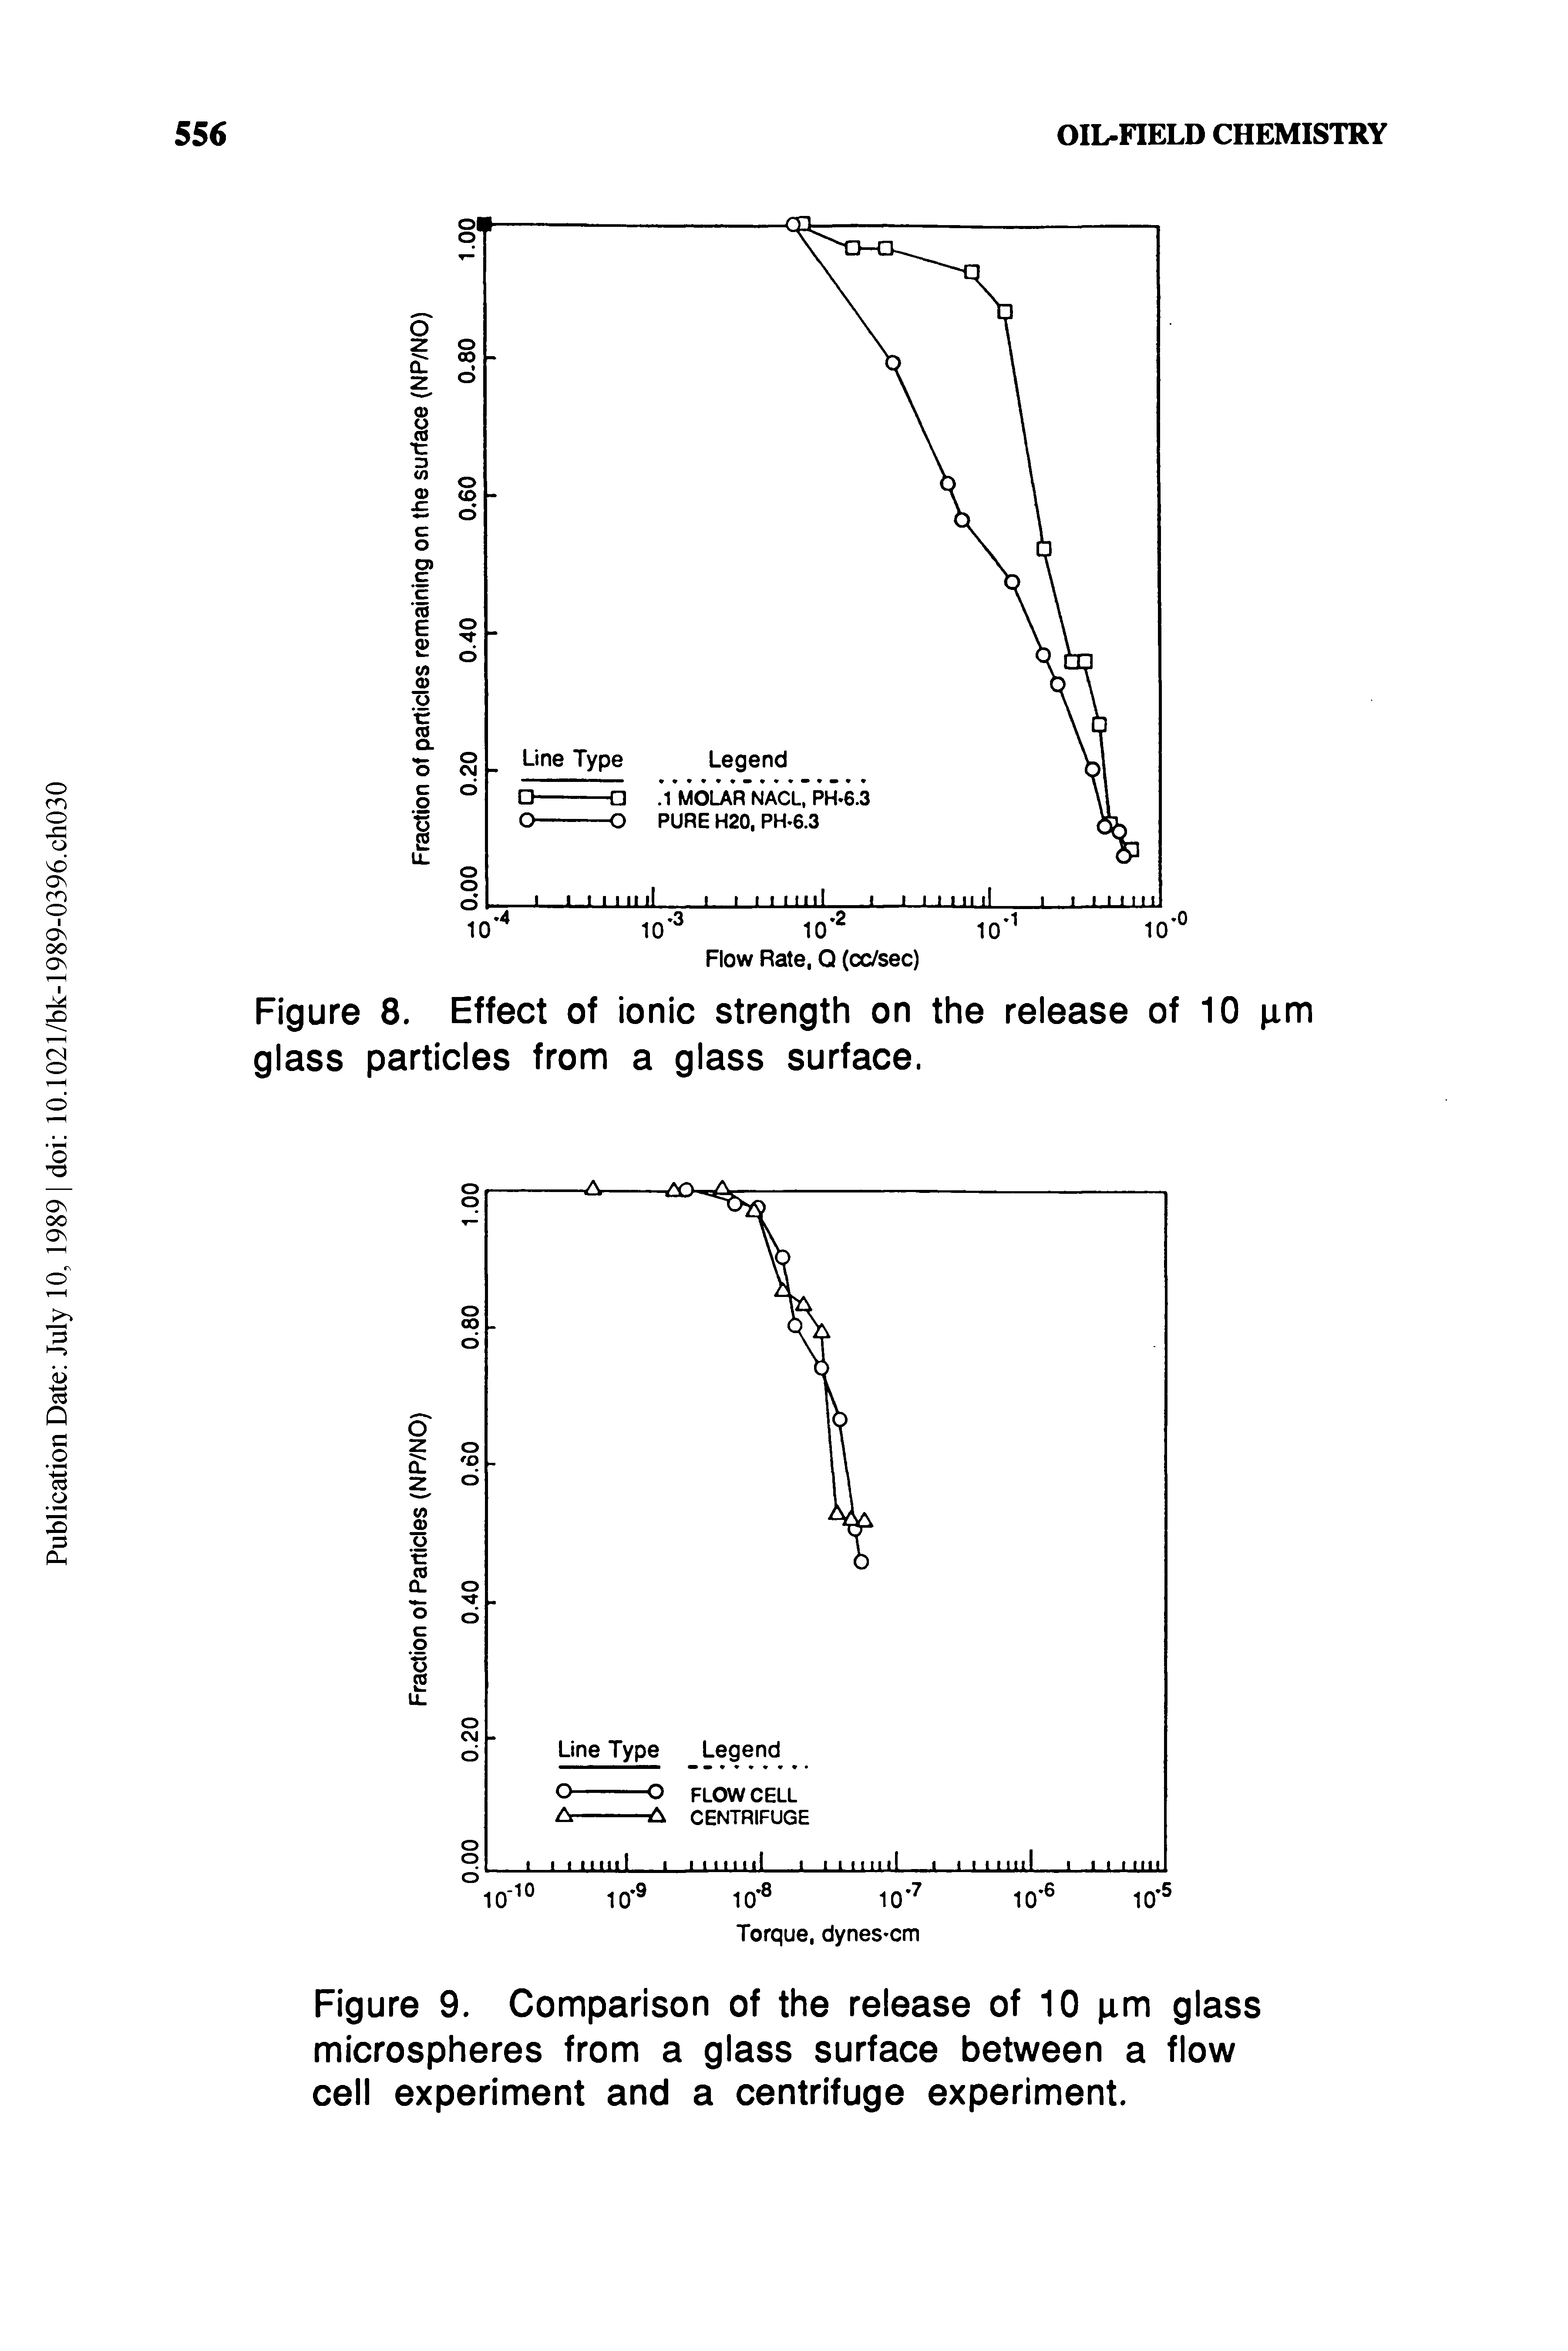 Figure 8. Effect of ionic strength on the release of 10 pm glass particles from a glass surface.